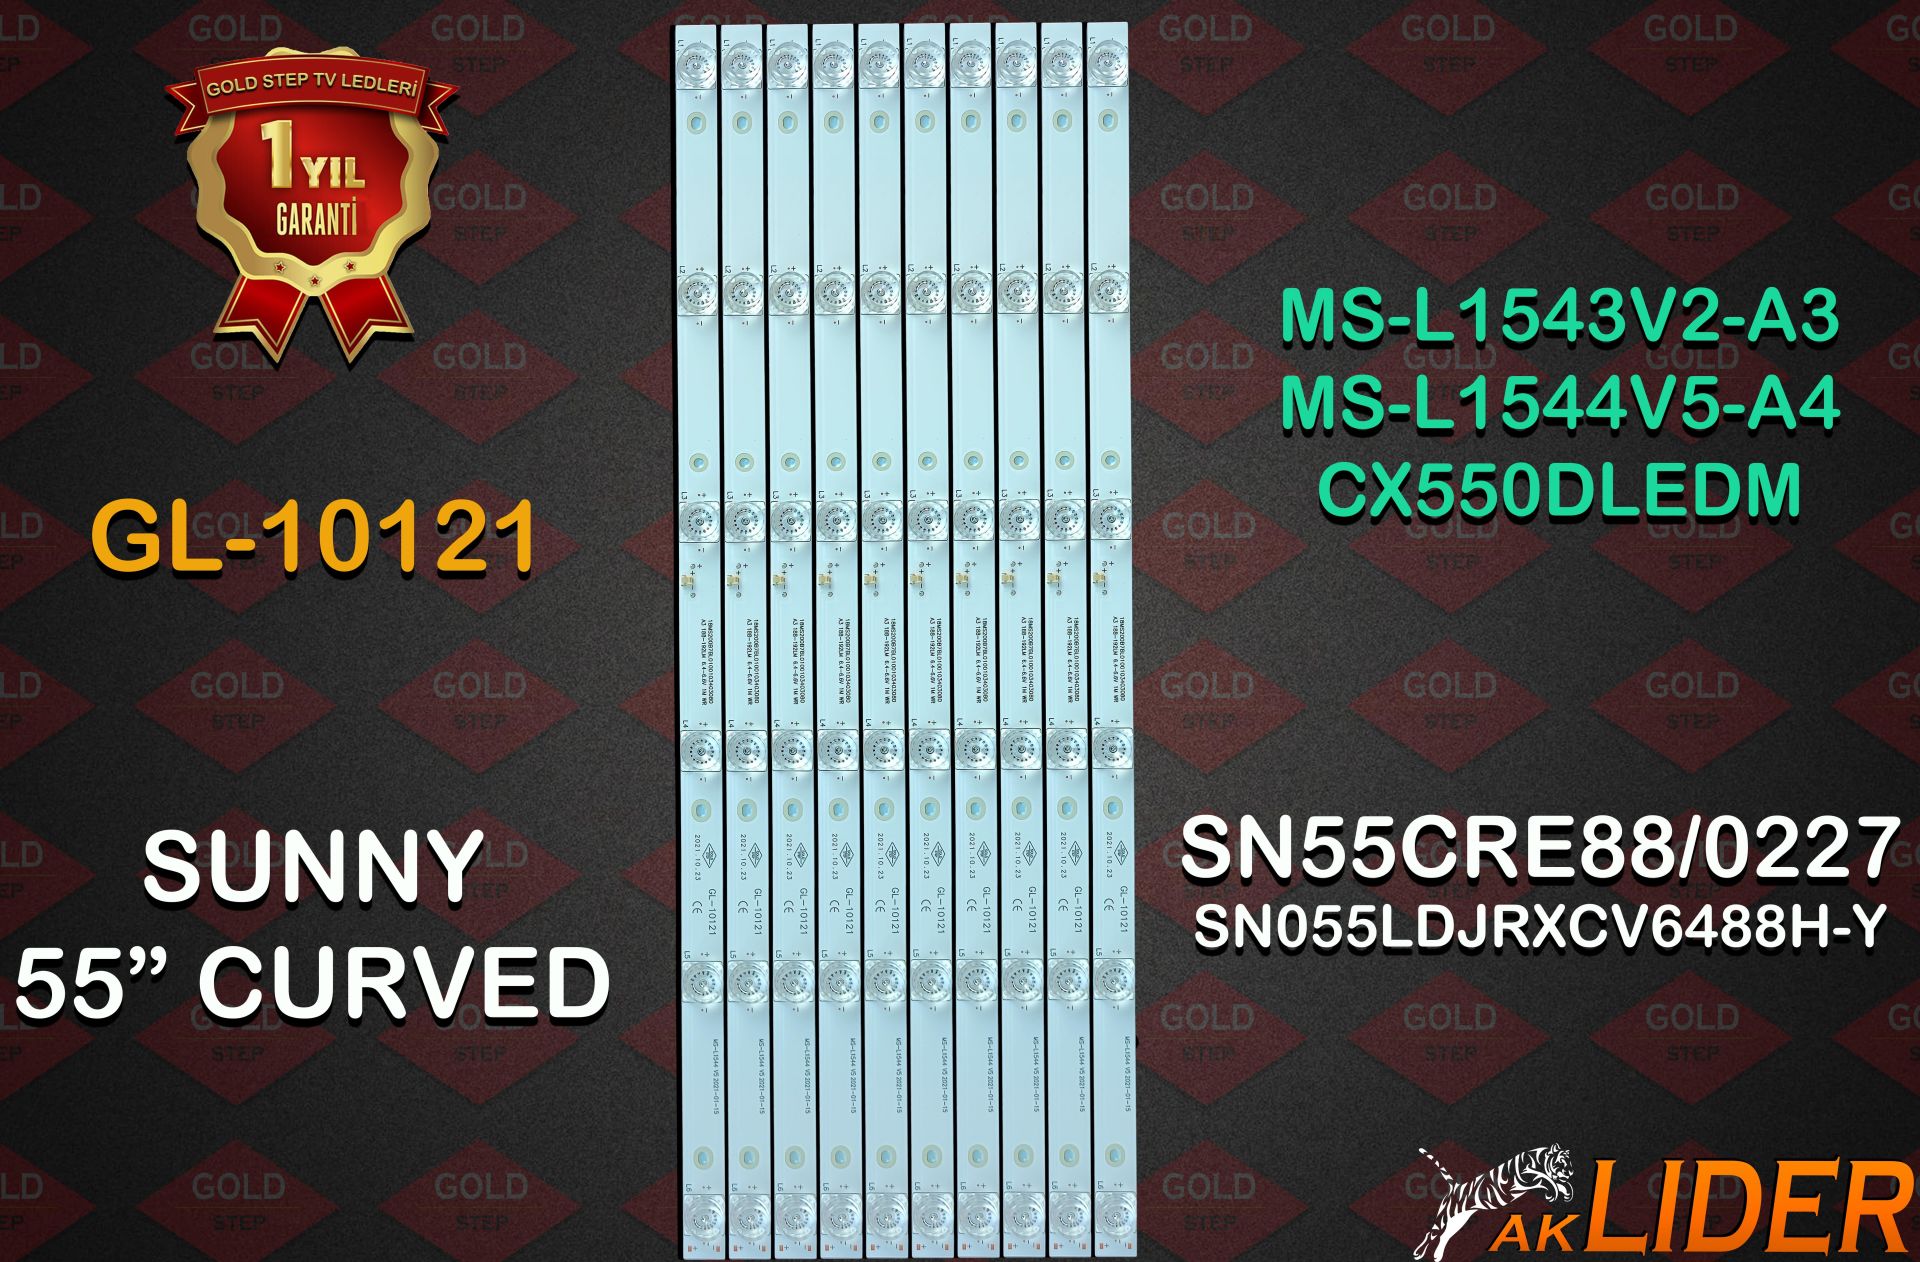 SUNNY 55'' CURVED MS-L1543 CX550DLEDM